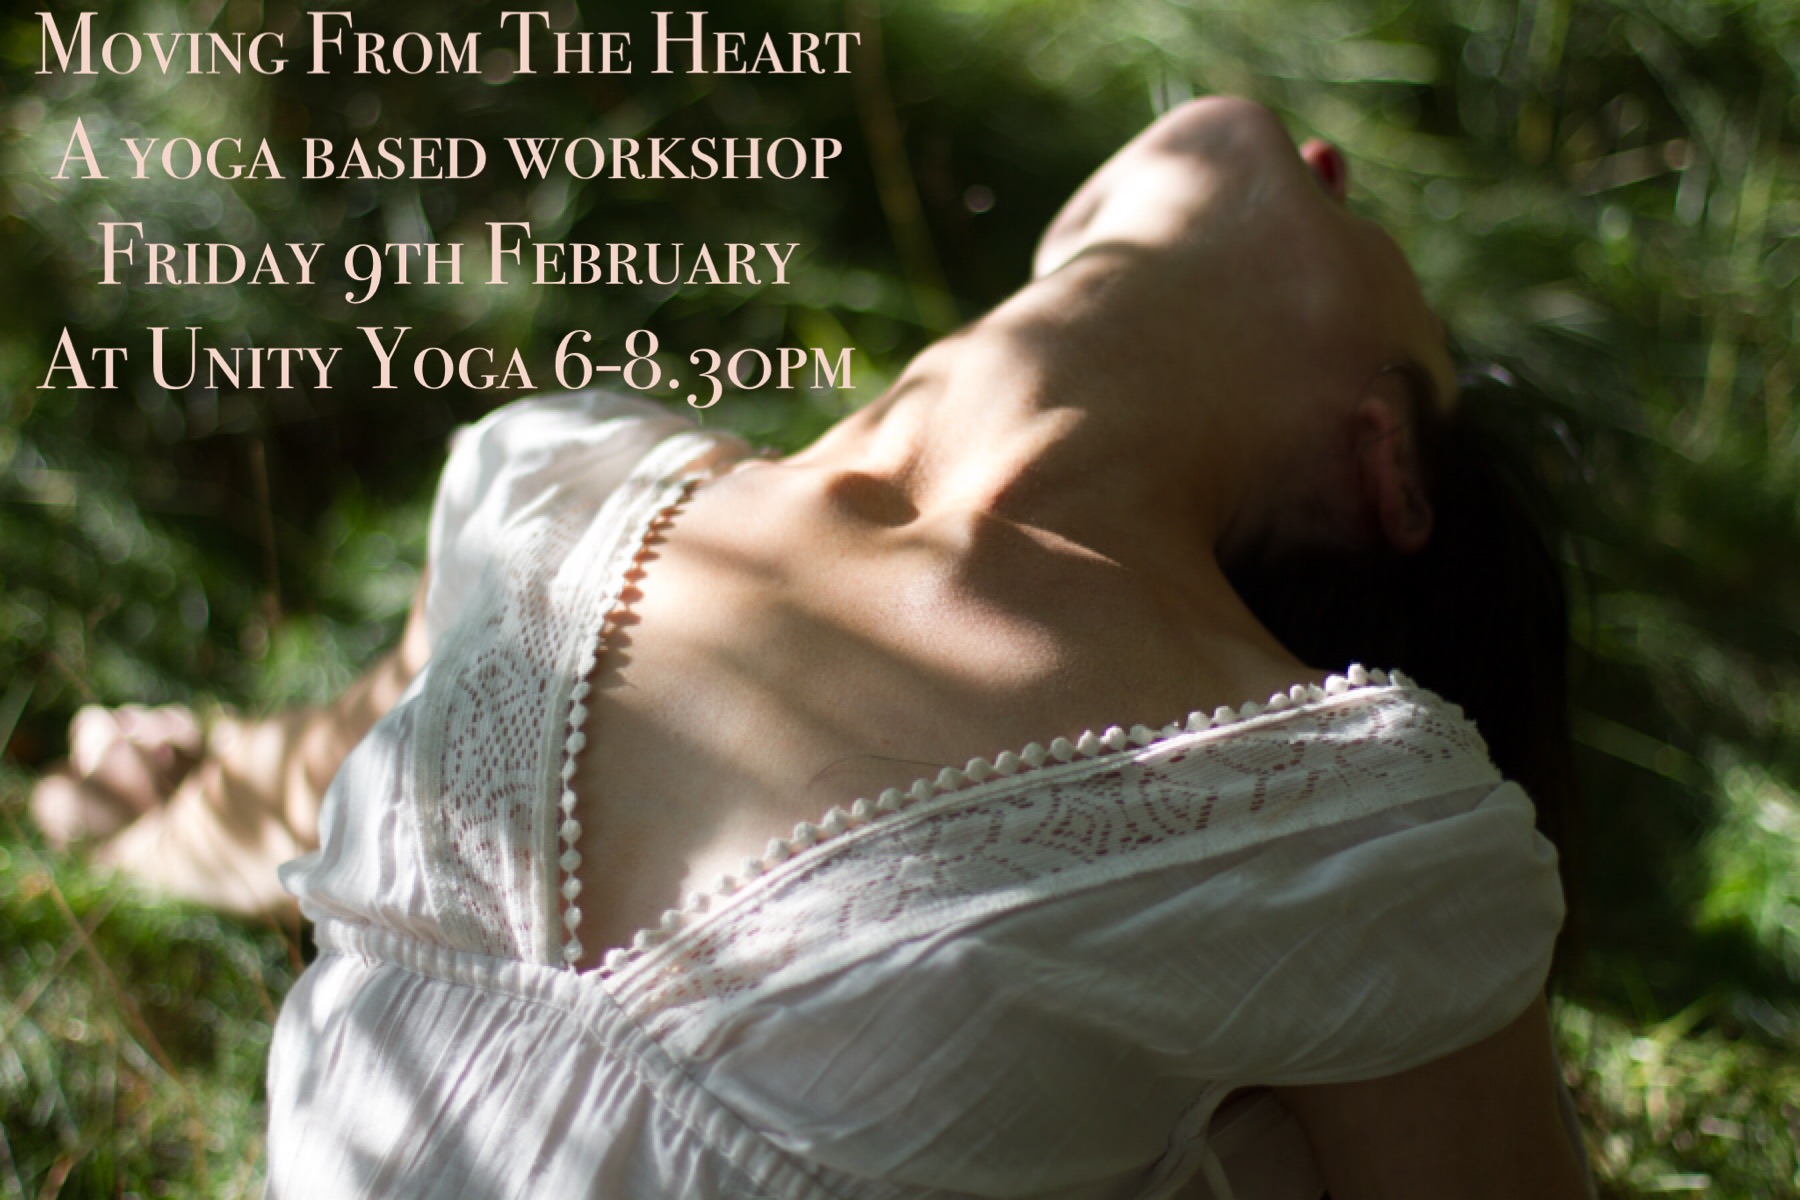 Moving From The Heart – a yoga based workshop